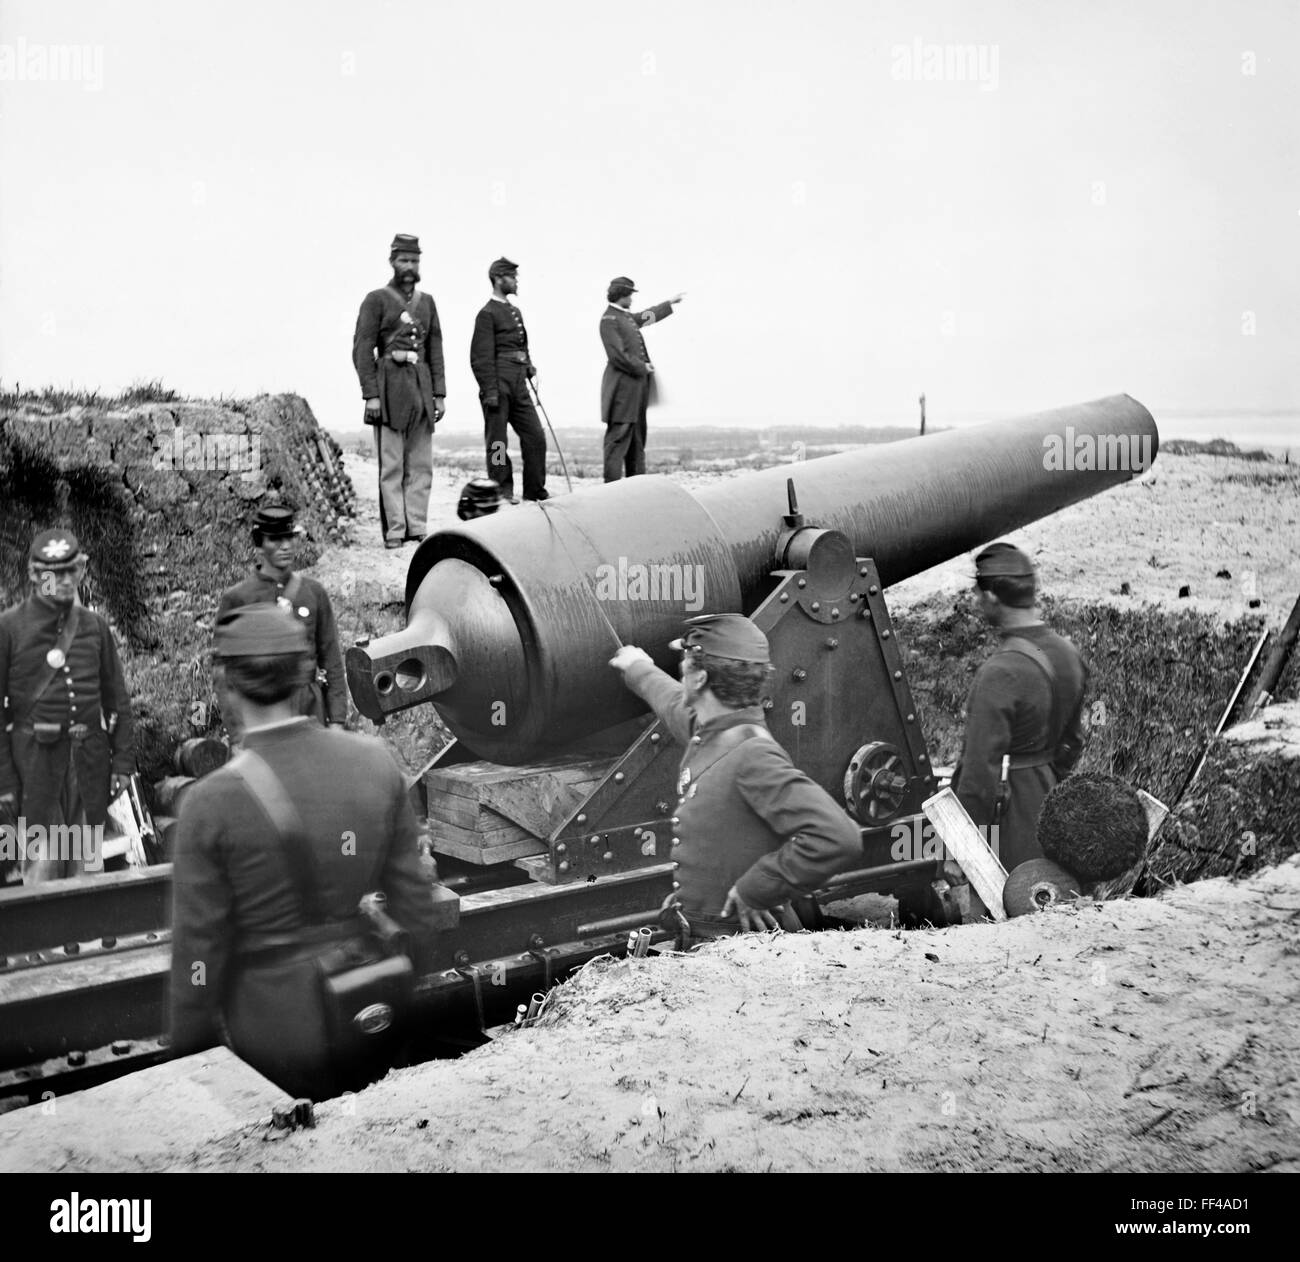 American Civil War. US army soldiers at Battery Chatfield, Fort Putnam, Morris Island, with guns pointed at Fort Sumter, Charleston, South Carolina during the American Civil War.  c. December 1864. Stock Photo